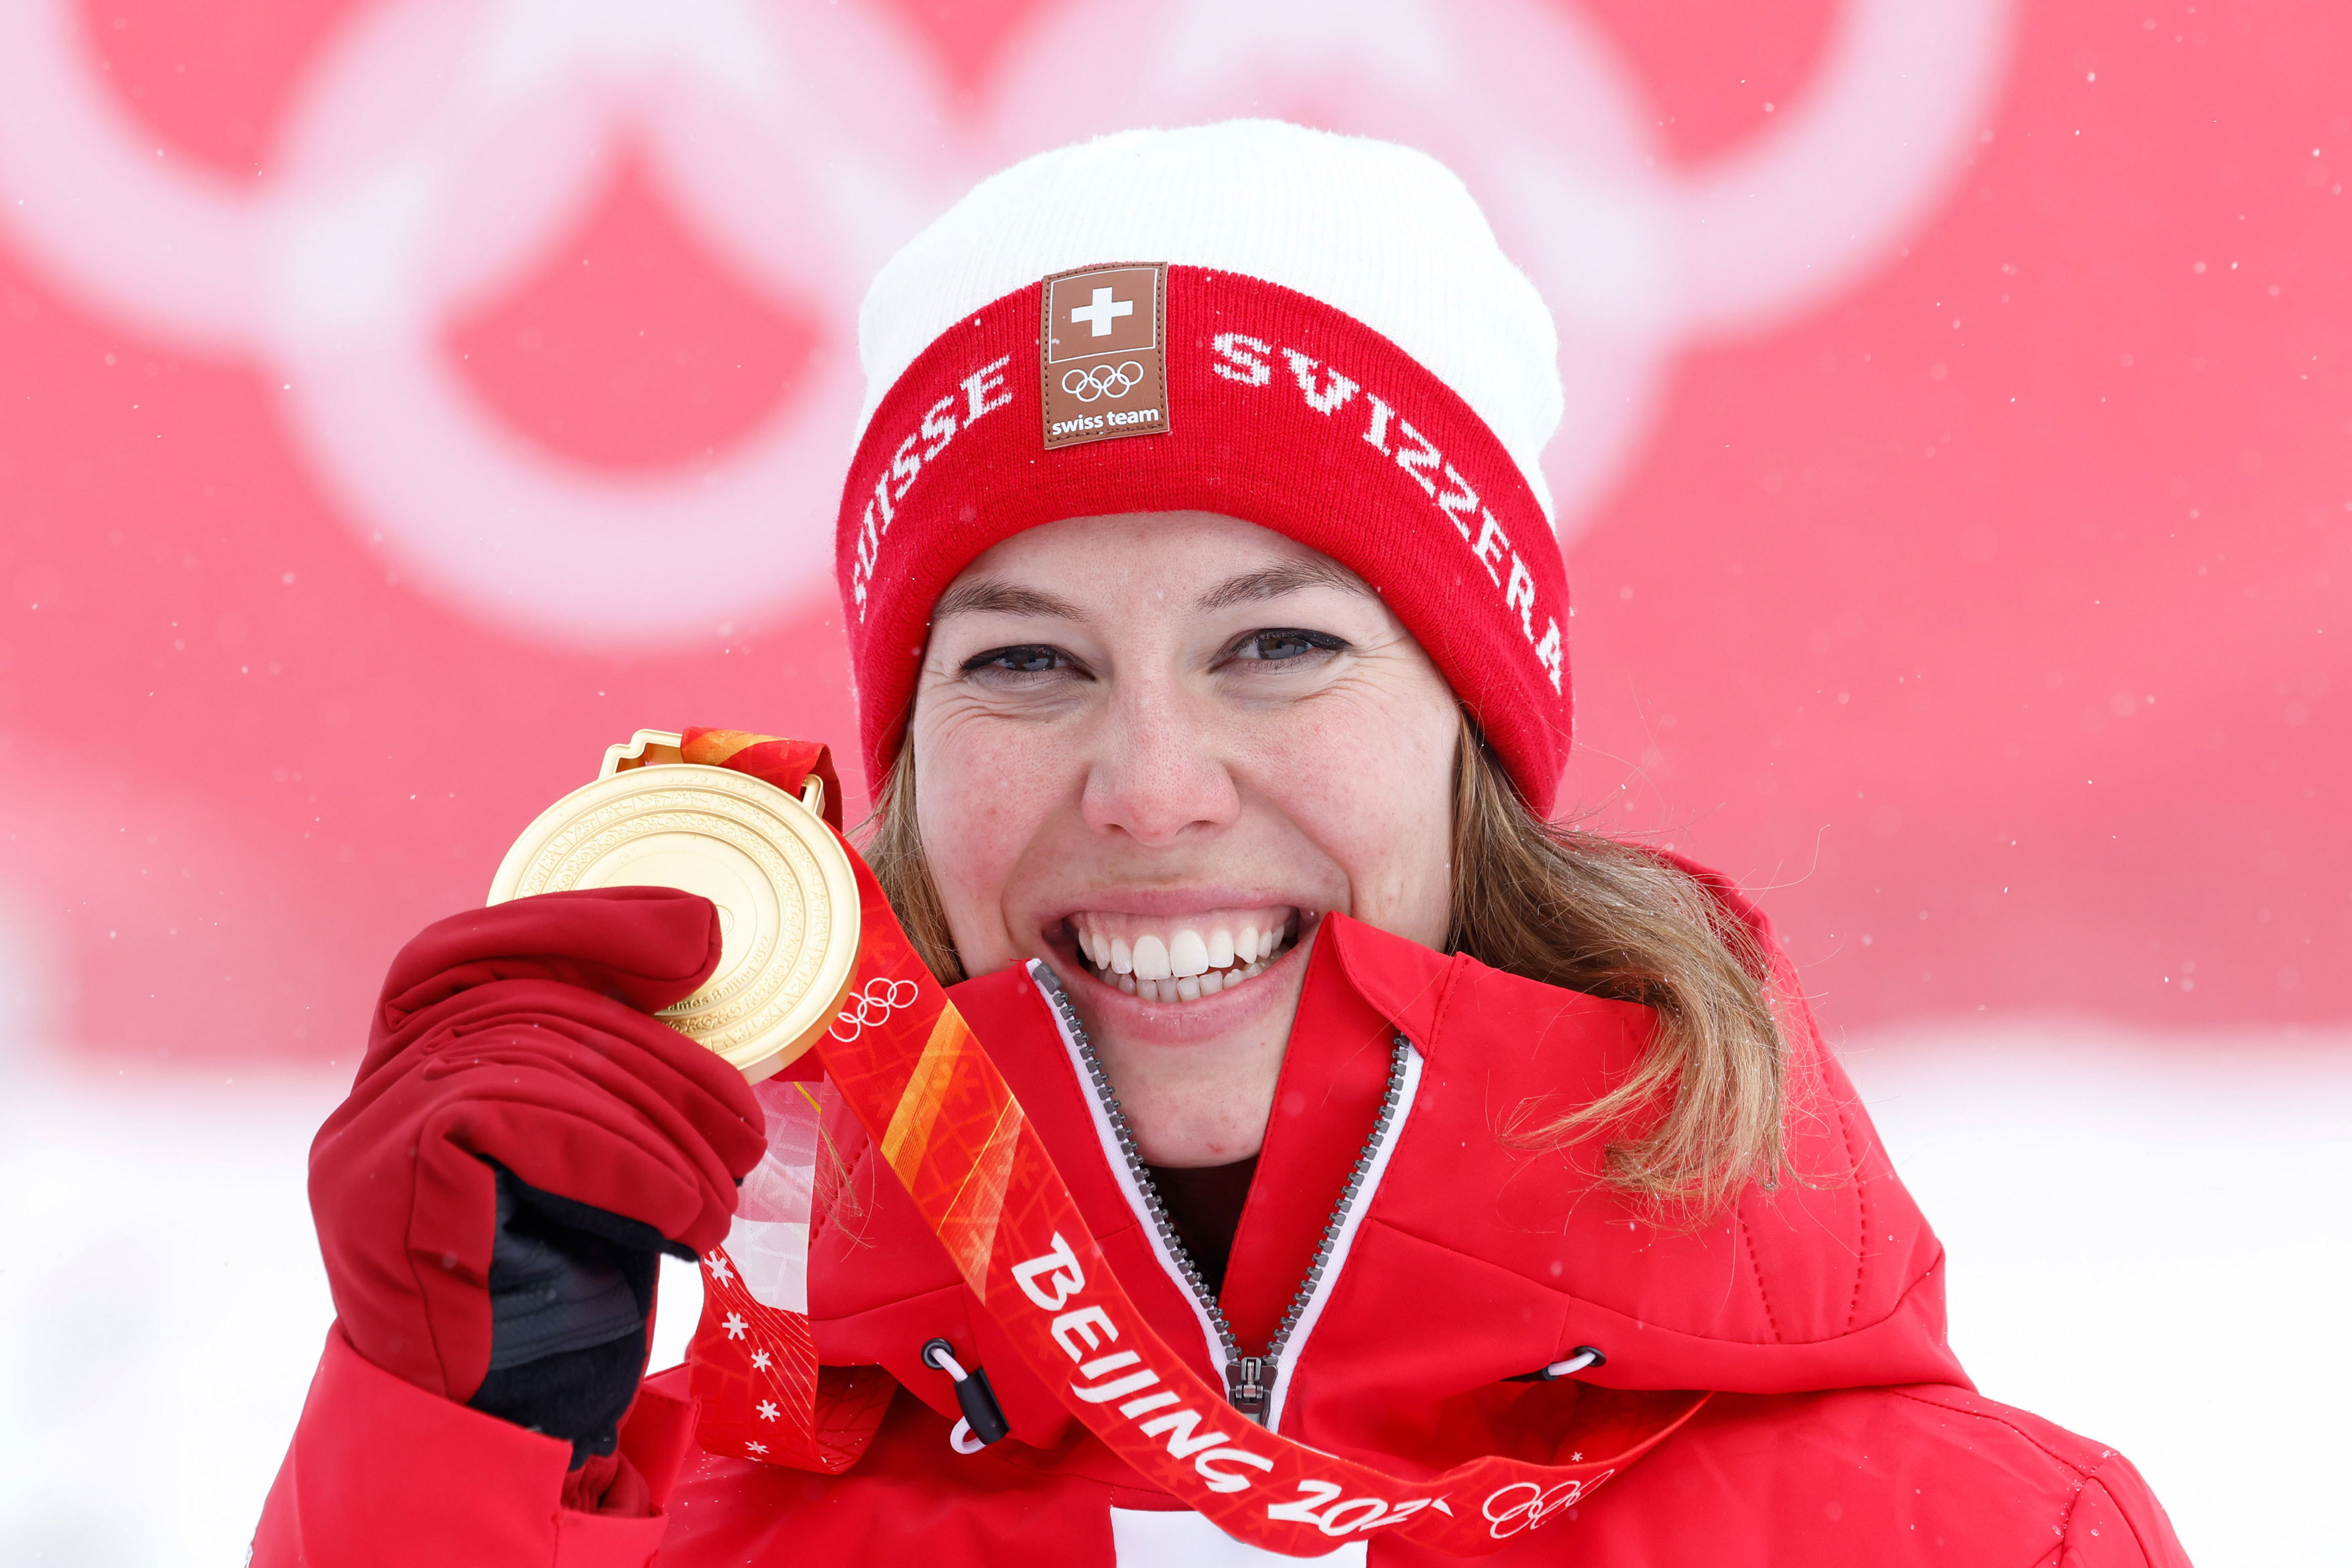 Switzerland's Michelle Gisin and her gold medal for the women's alpine combined on Feb 17.